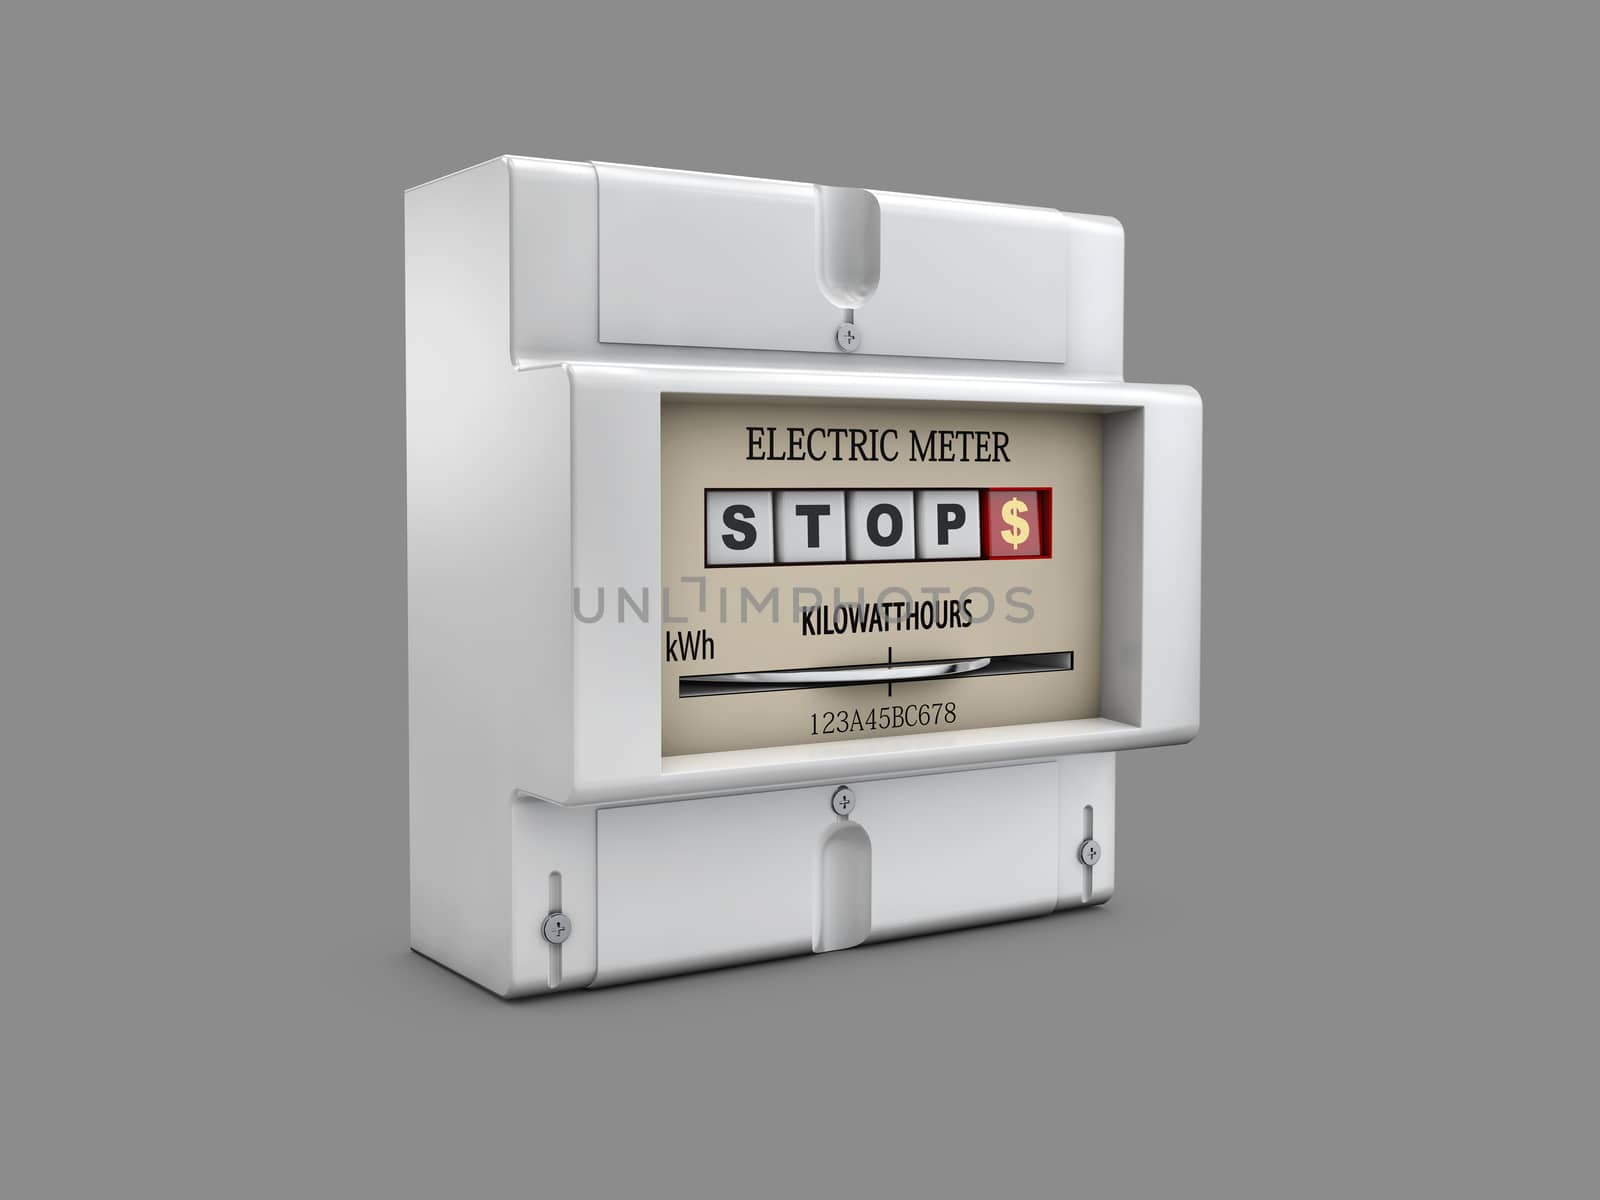 3d Illustration of Electric meter on gray background.